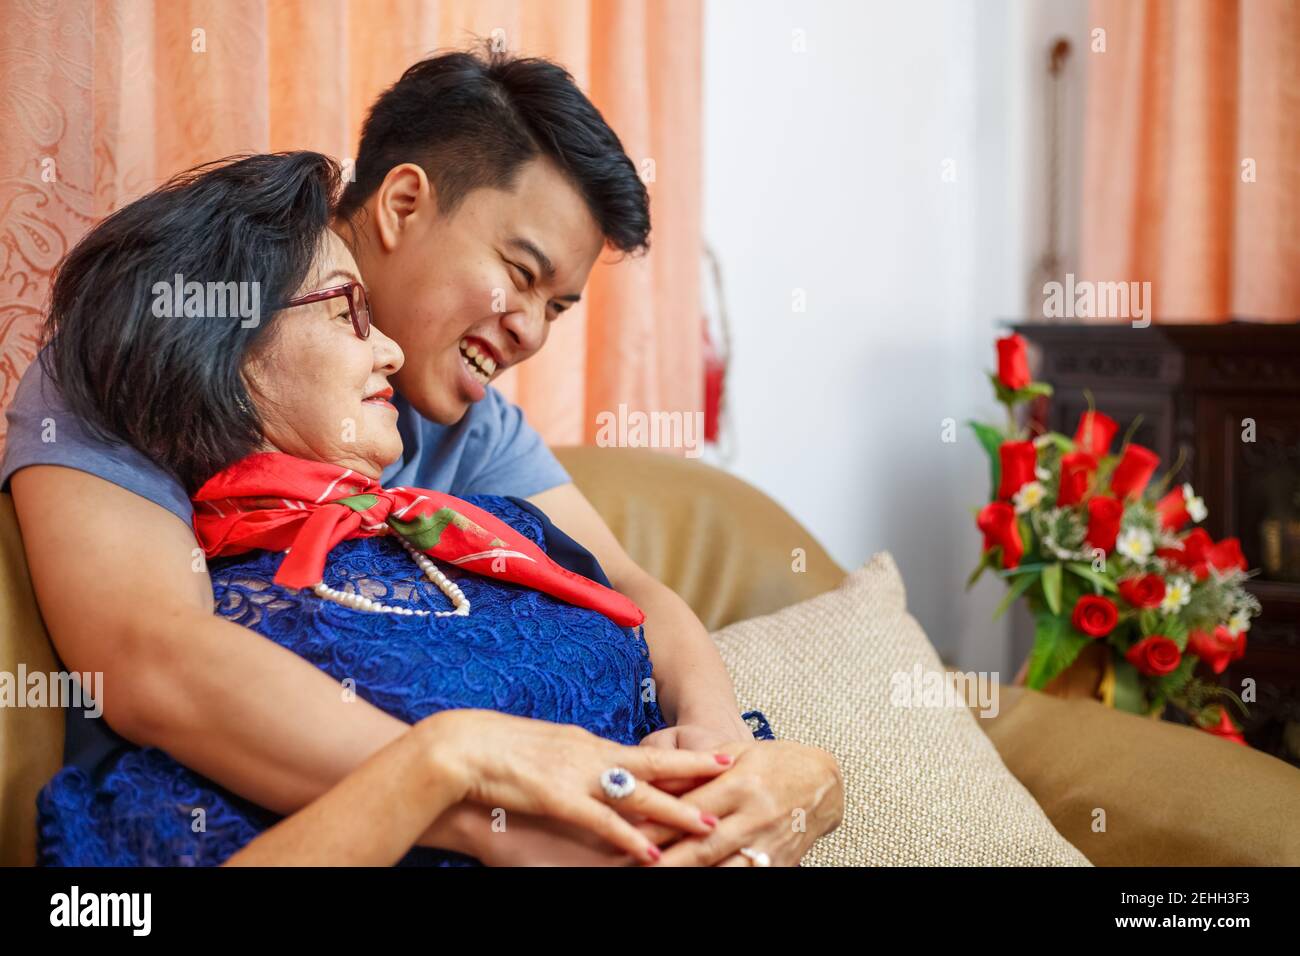 Adult son comimg home and hug mother on the mothers day Stock Photo